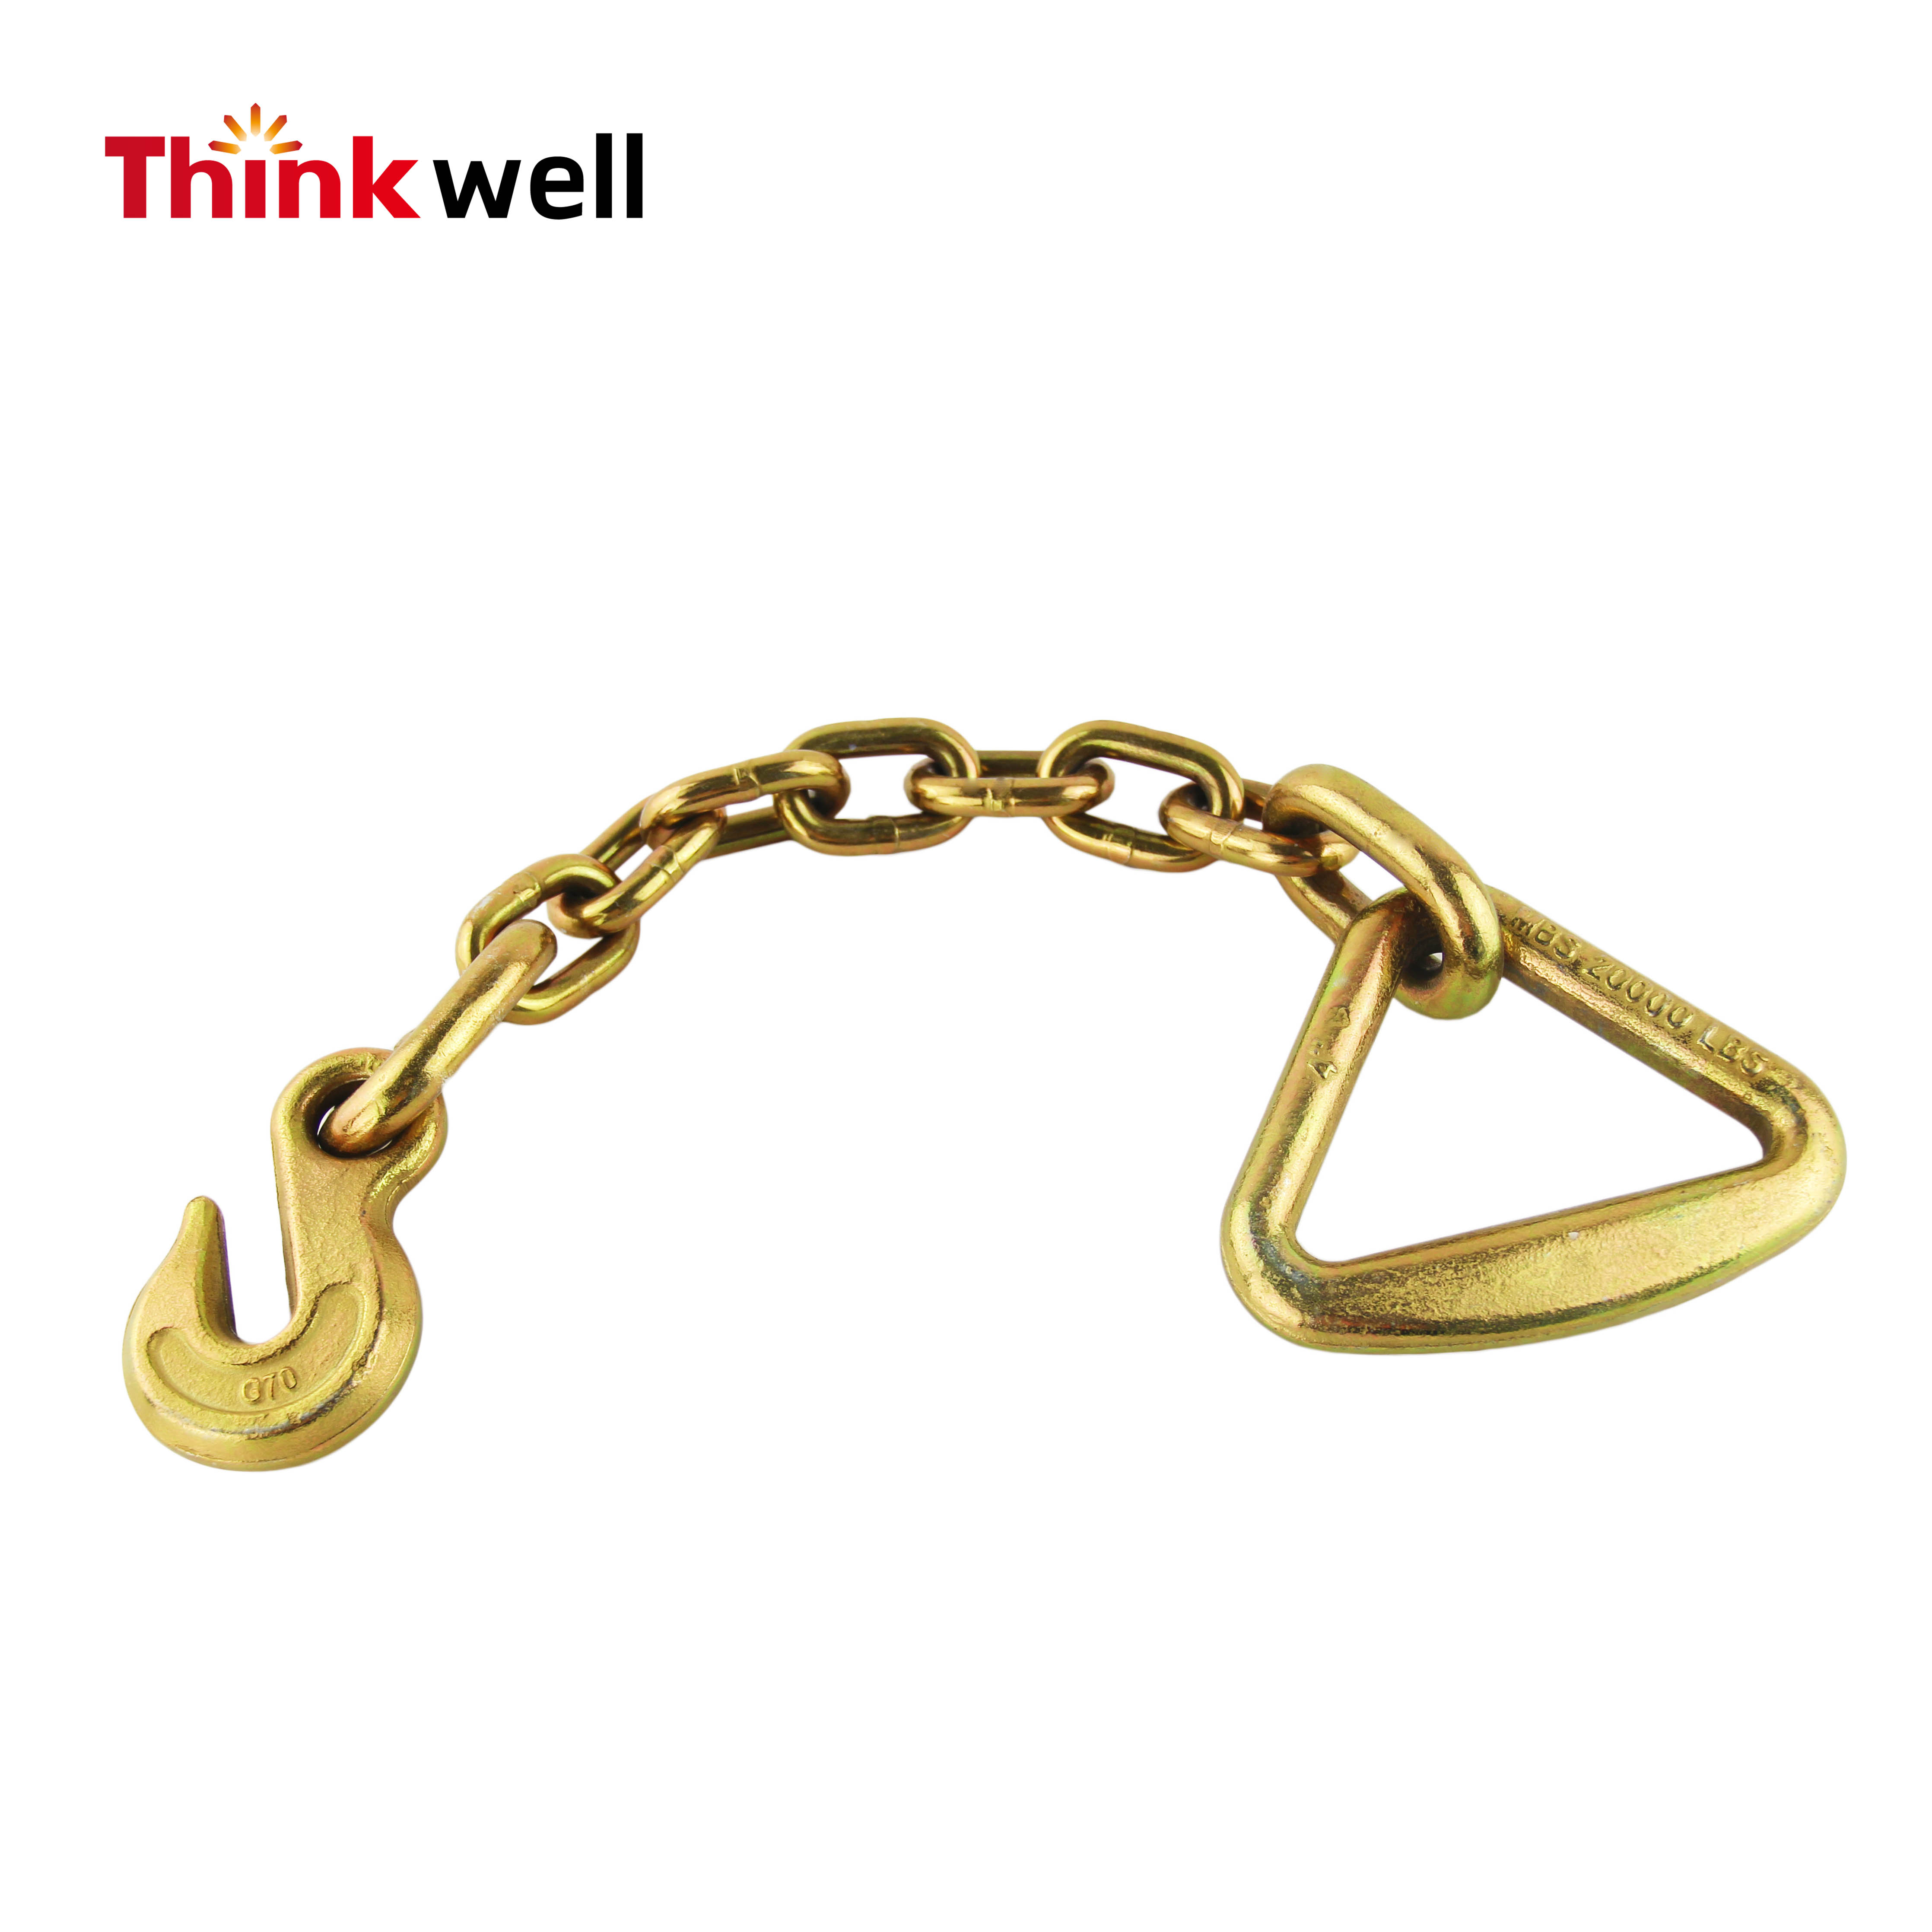 Grade 70 Triangle Ring Chain Sling with Eye Grab Hook